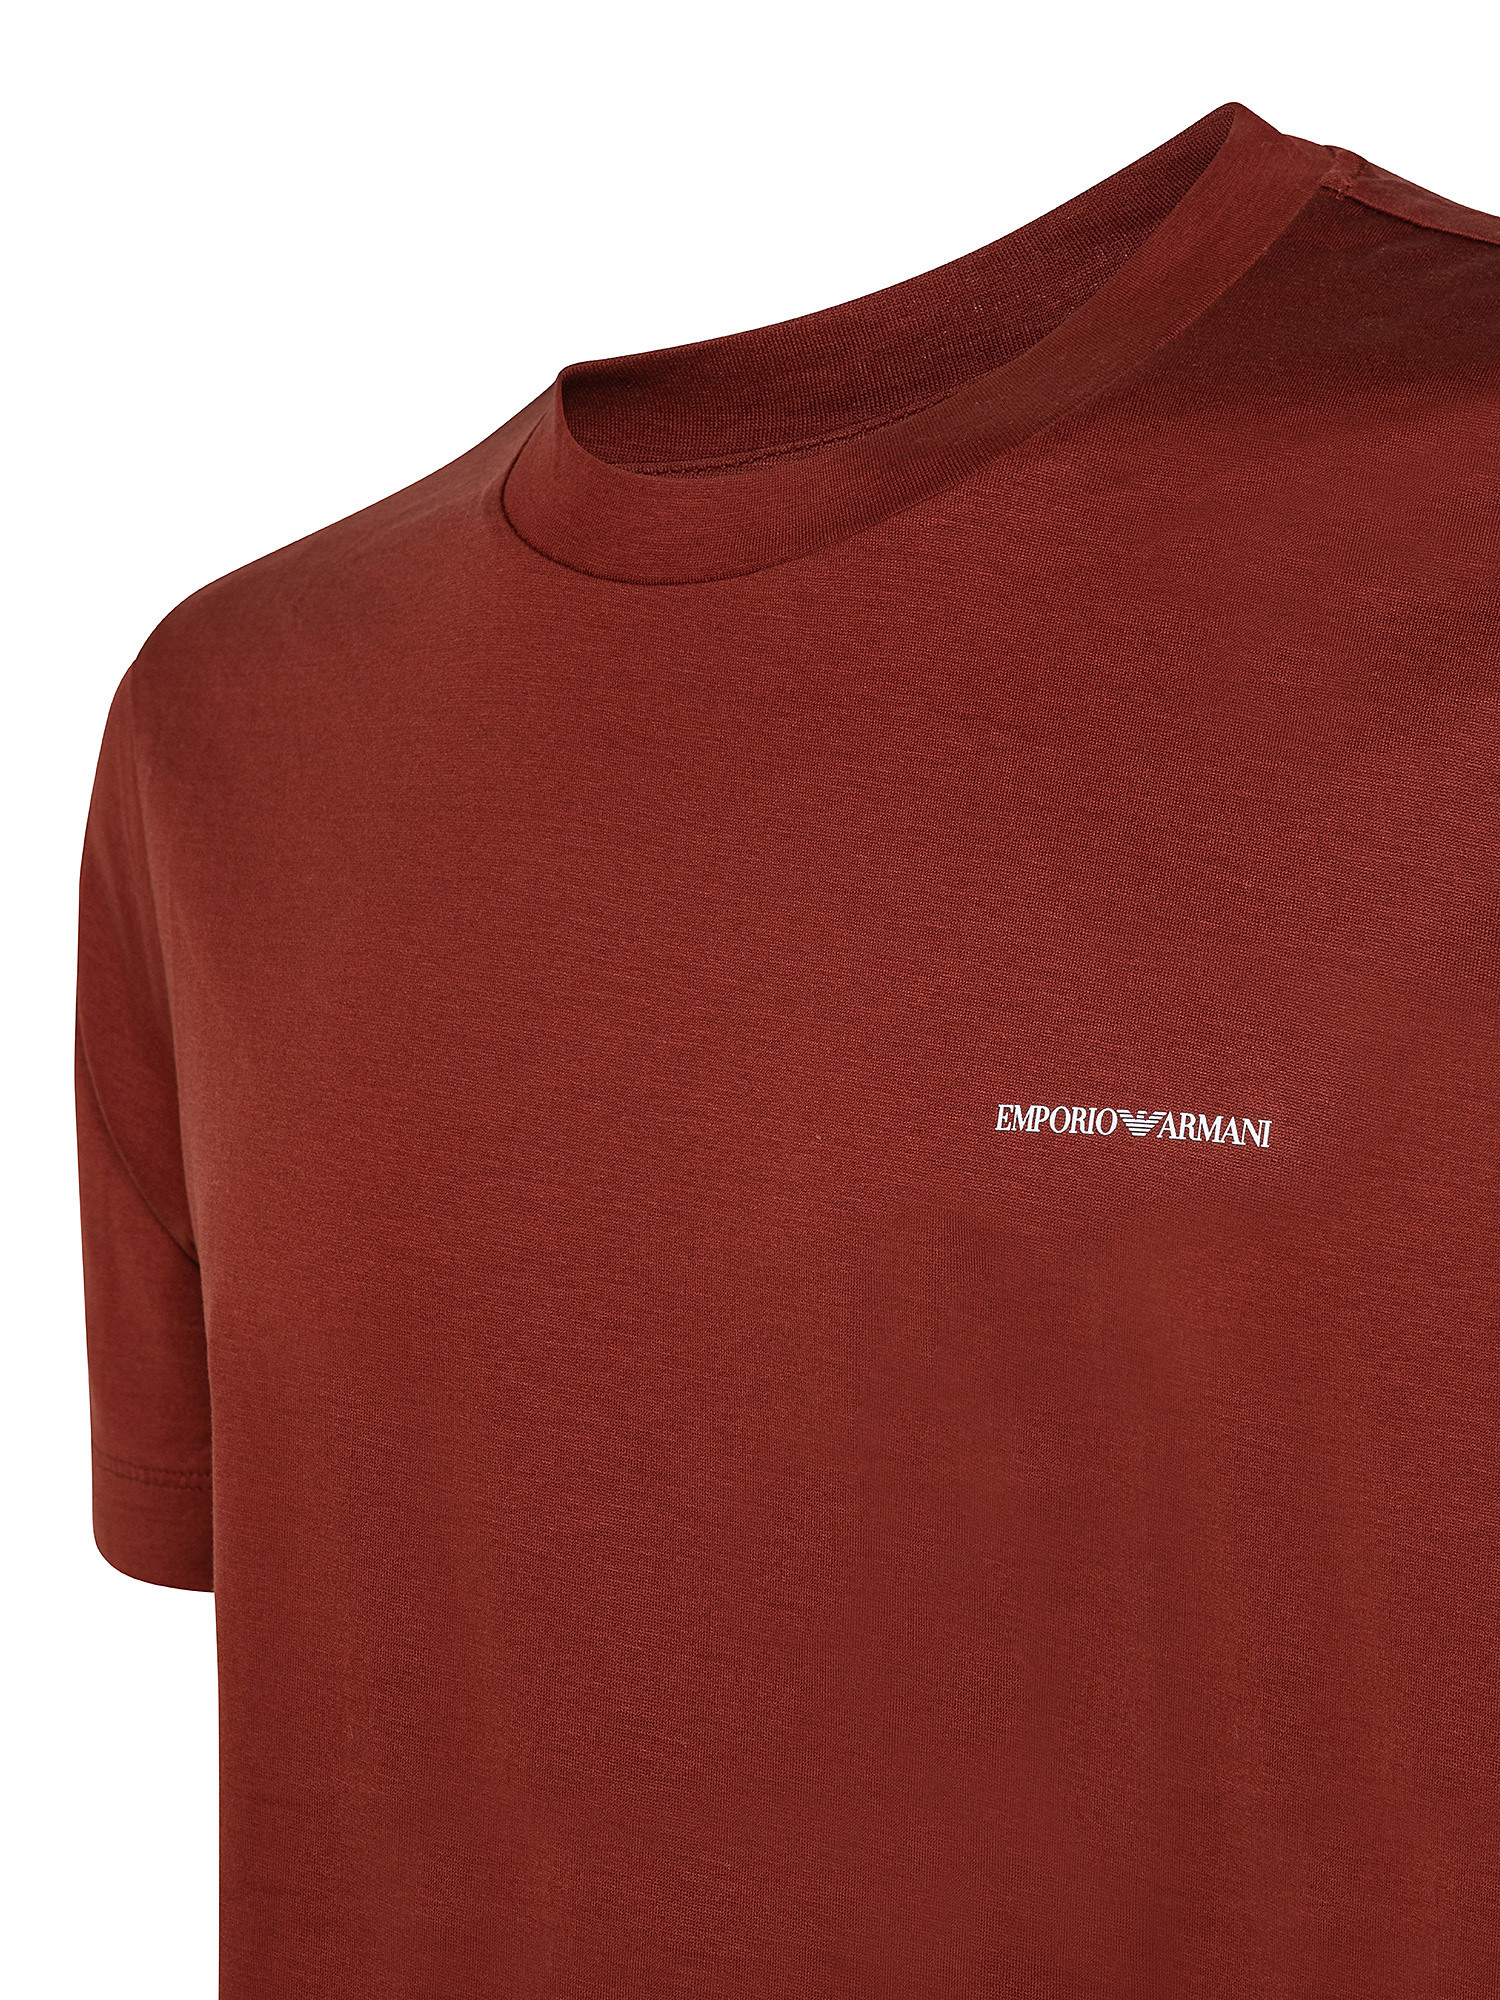 T-shirt logo, Rosso mattone, large image number 2